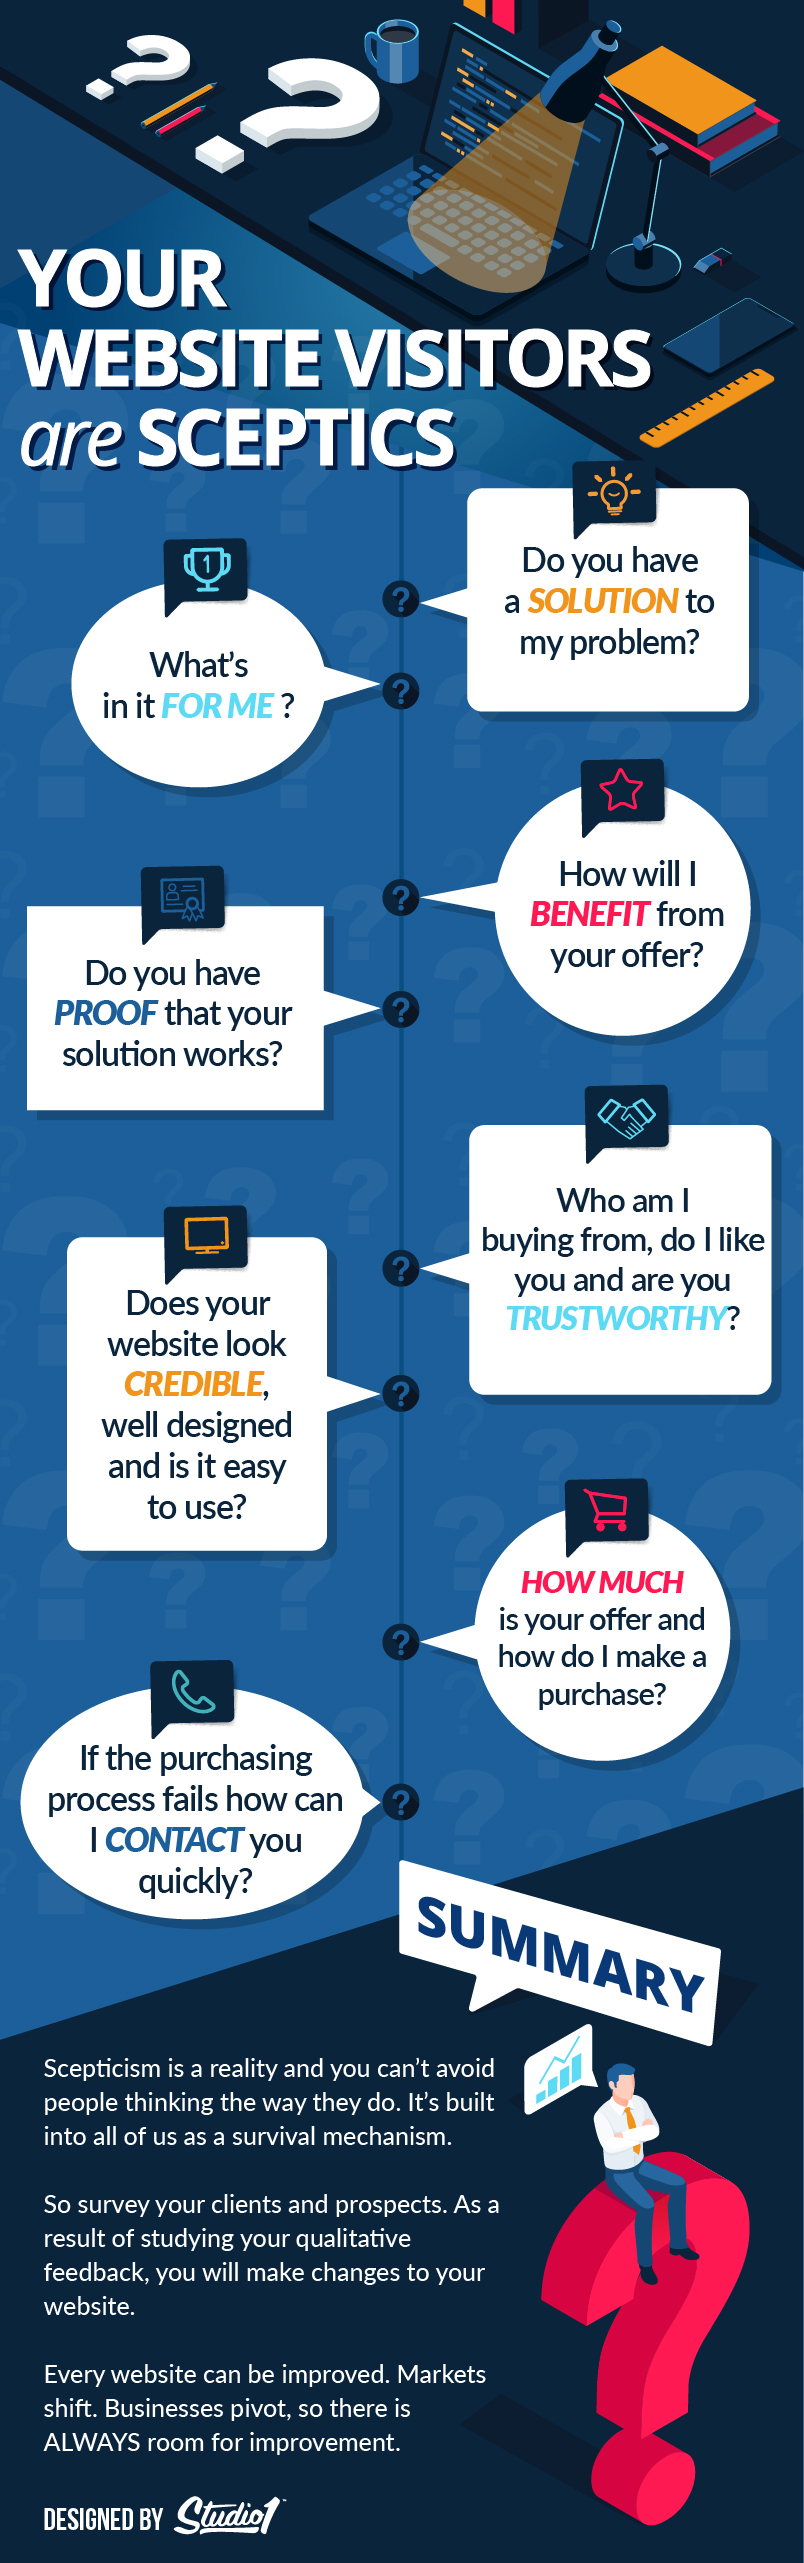 YOUR WEBSITE VISITORS ARE SCEPTICS - INFOGRAPHIC-02